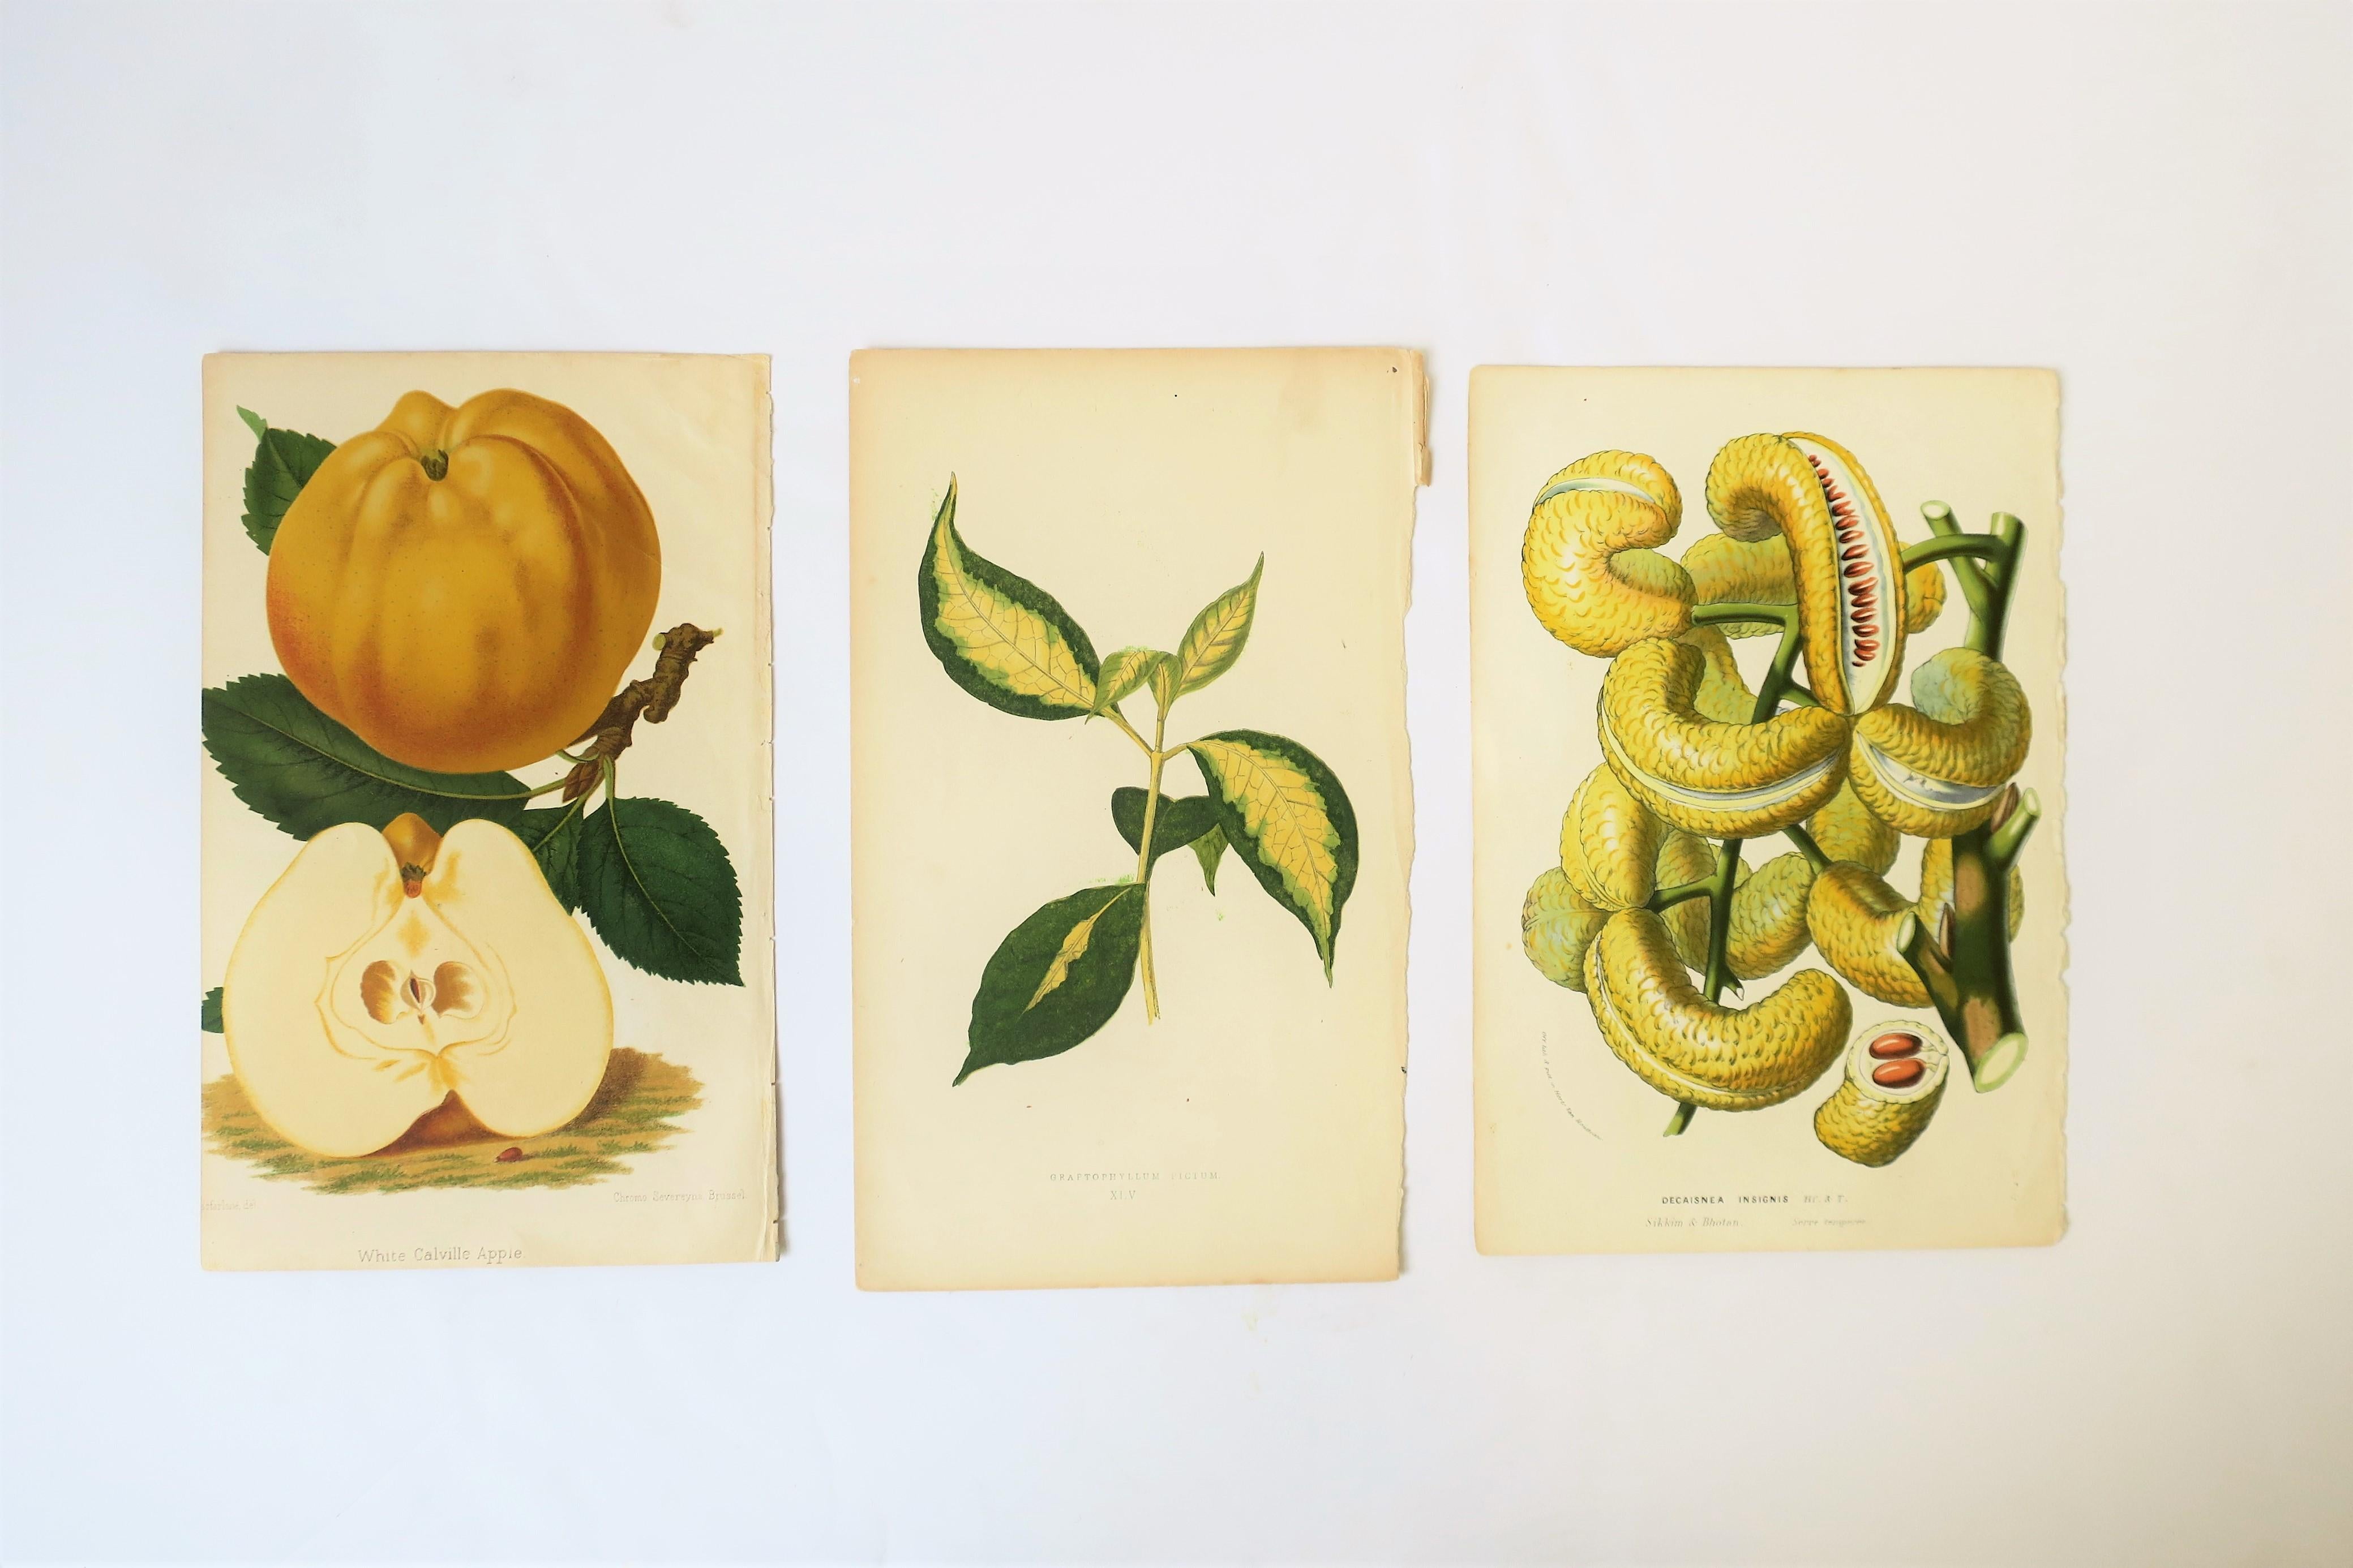 Beautiful original Belgian and French late 19th century exotic botanical vibrant color prints. Selection is comprised of flowers, leaves, and fruits. Each item is original, not reprinted, not a reproduction. Predominate colors include: yellow and